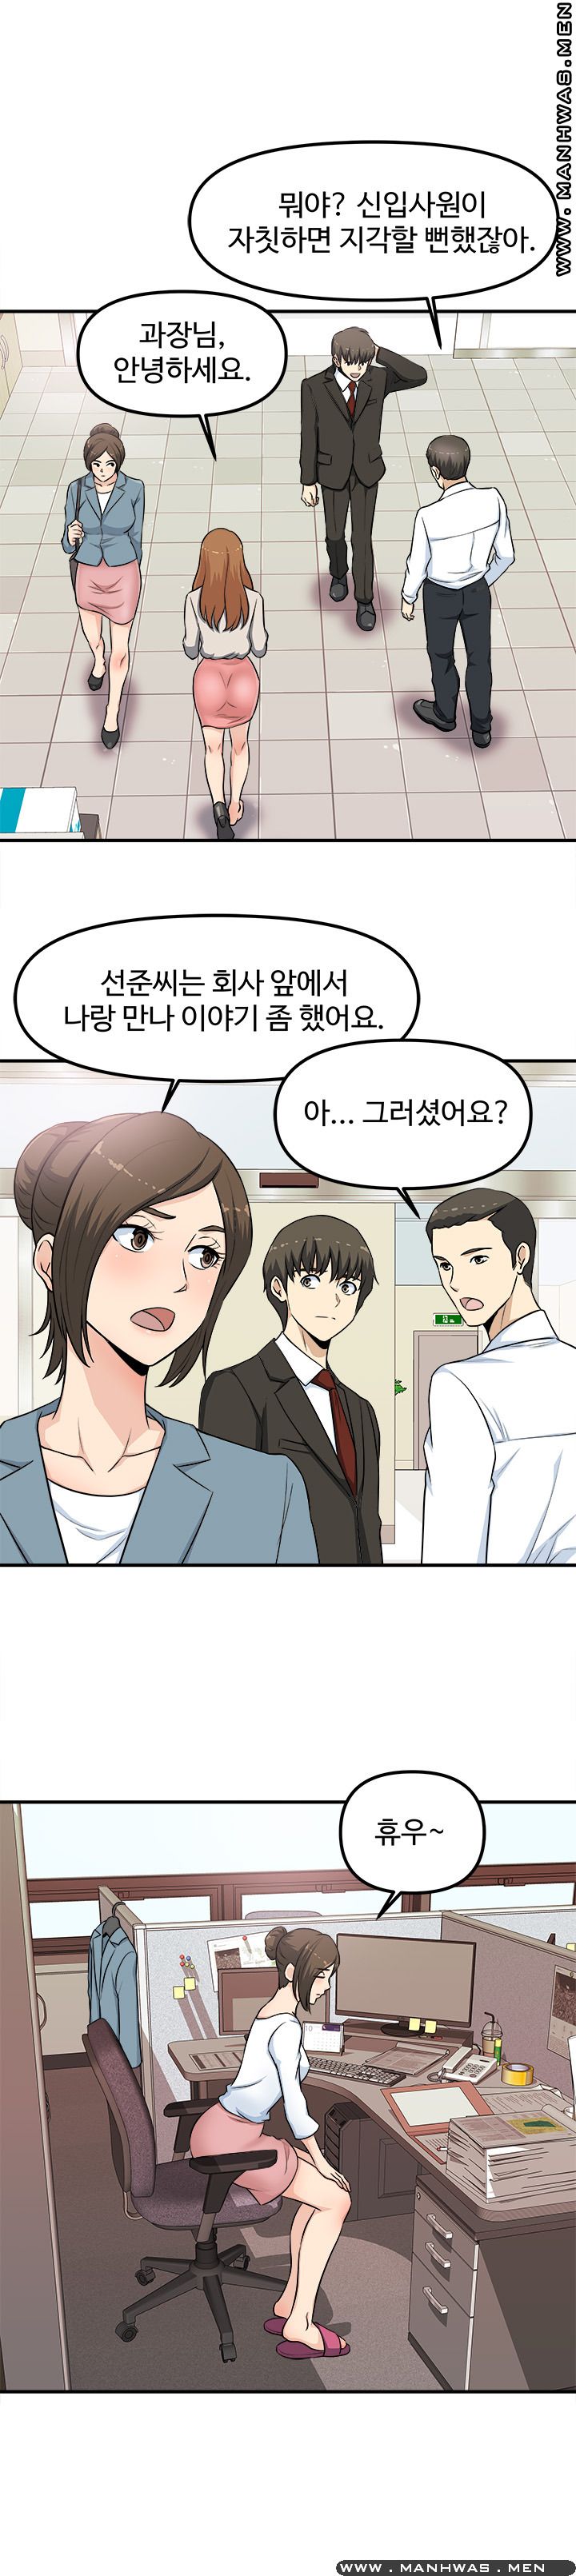 Office Bible Raw - Chapter 4 Page 1